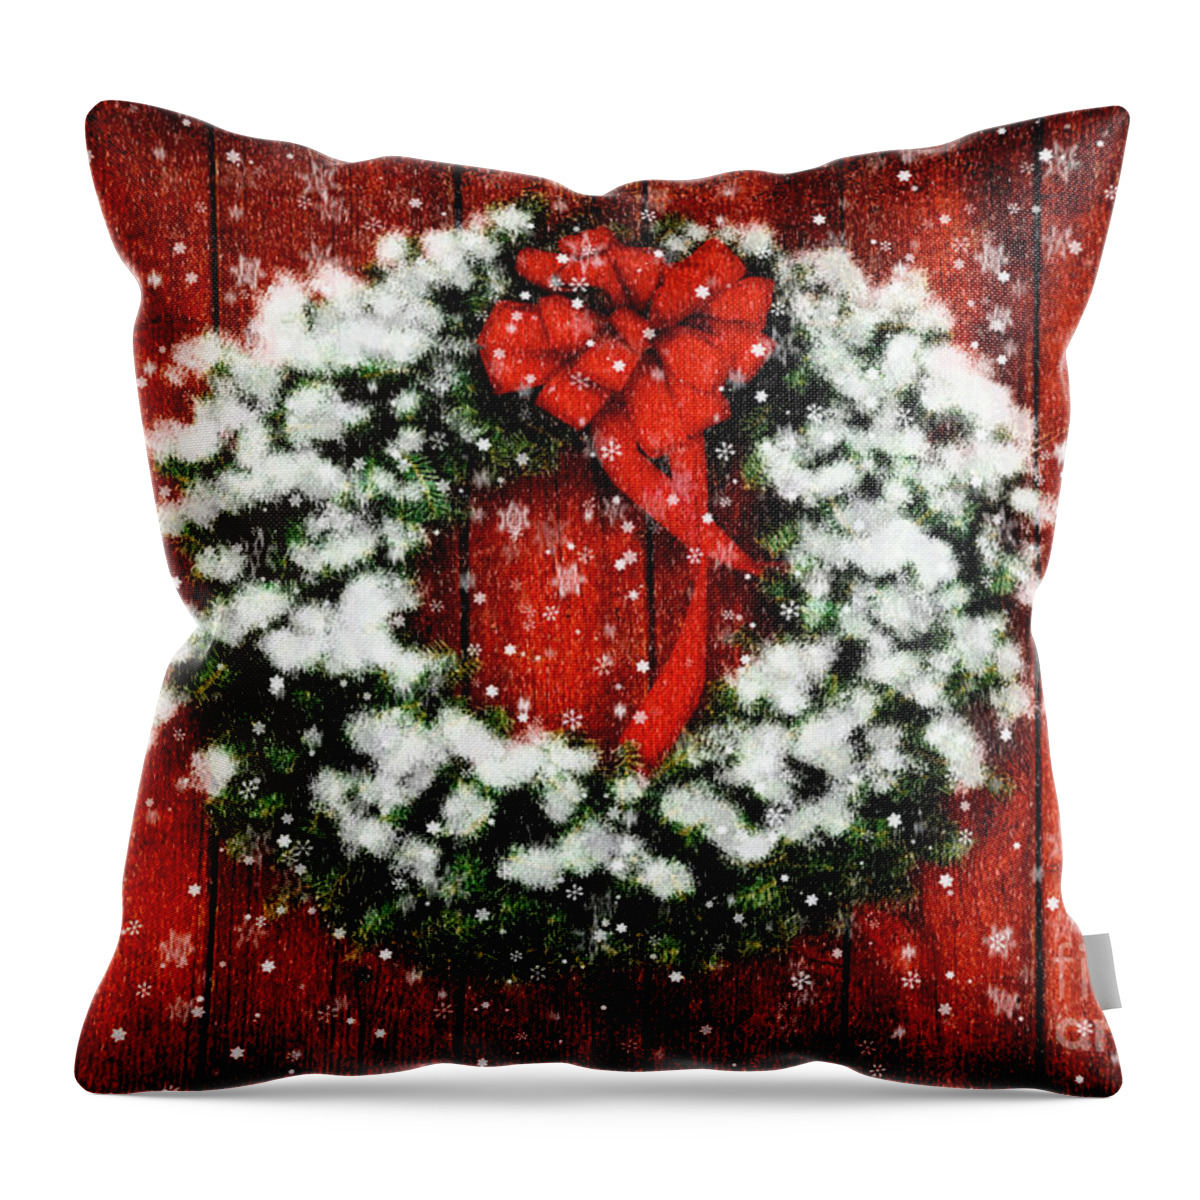 Christmas Throw Pillow featuring the photograph Snowy Christmas Wreath by Lois Bryan